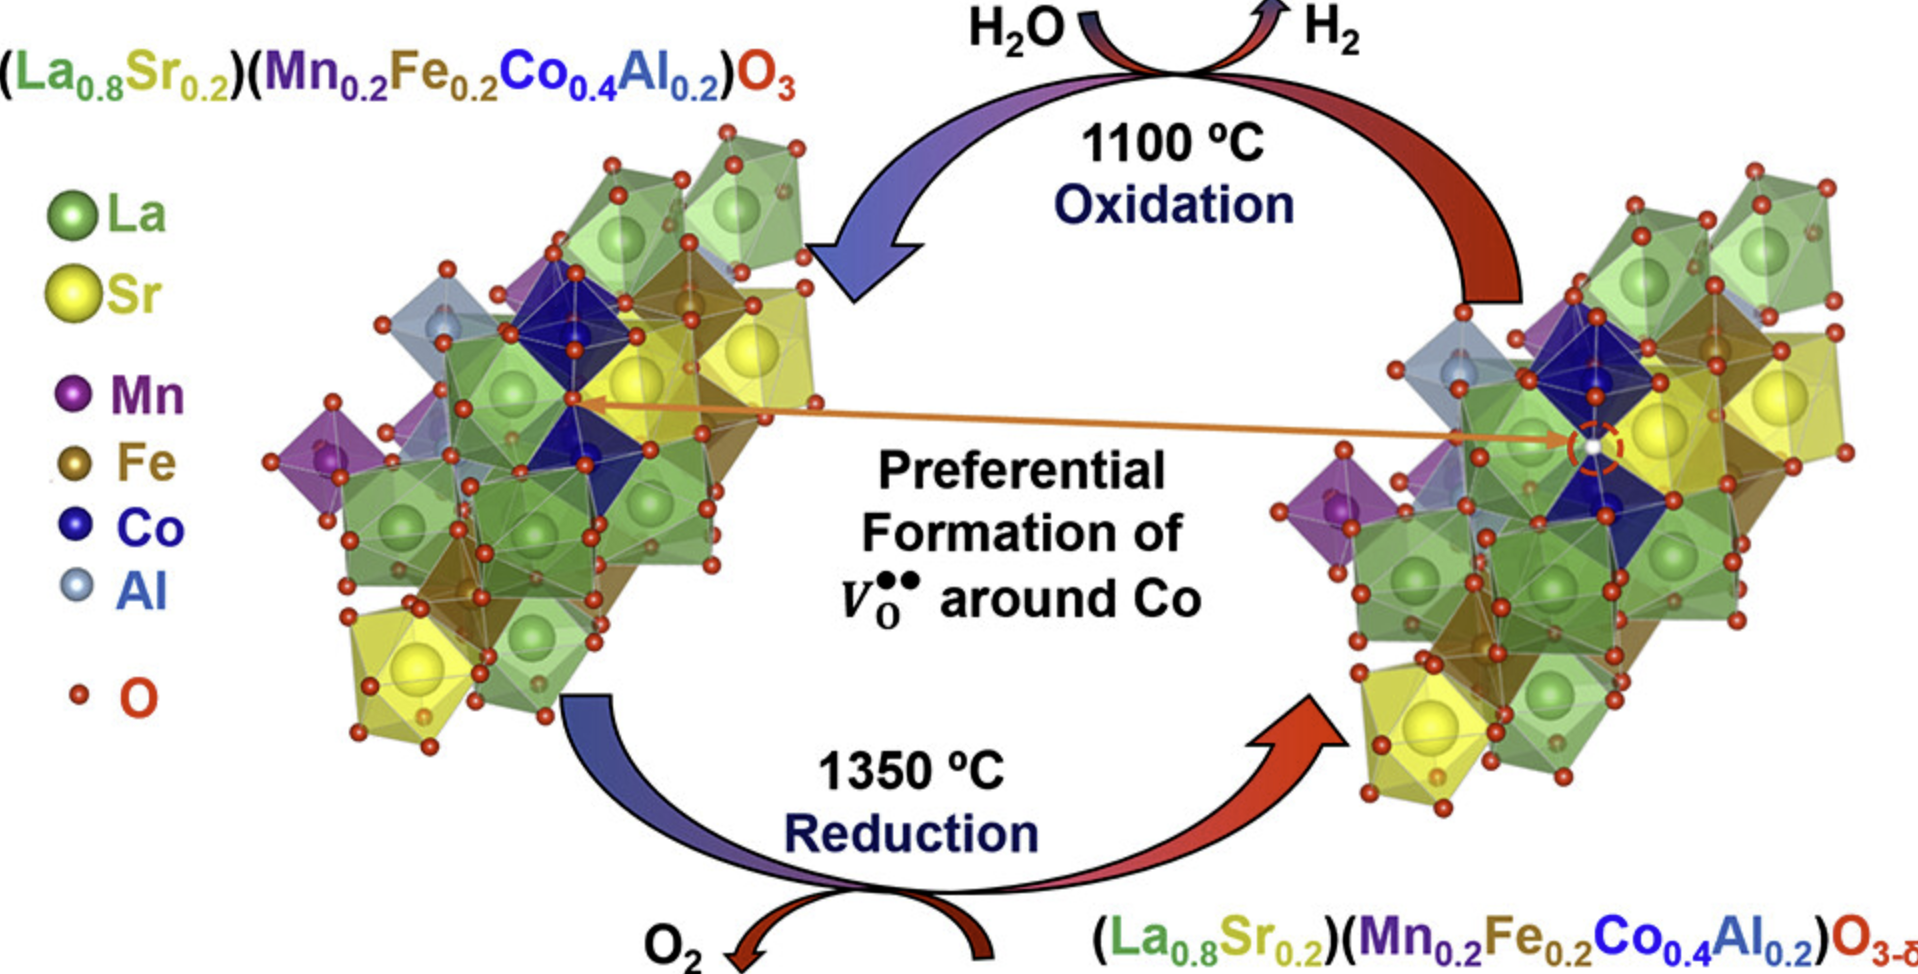 Compositionally Complex Perovskite Oxides for Solar Thermochemical Water Splitting